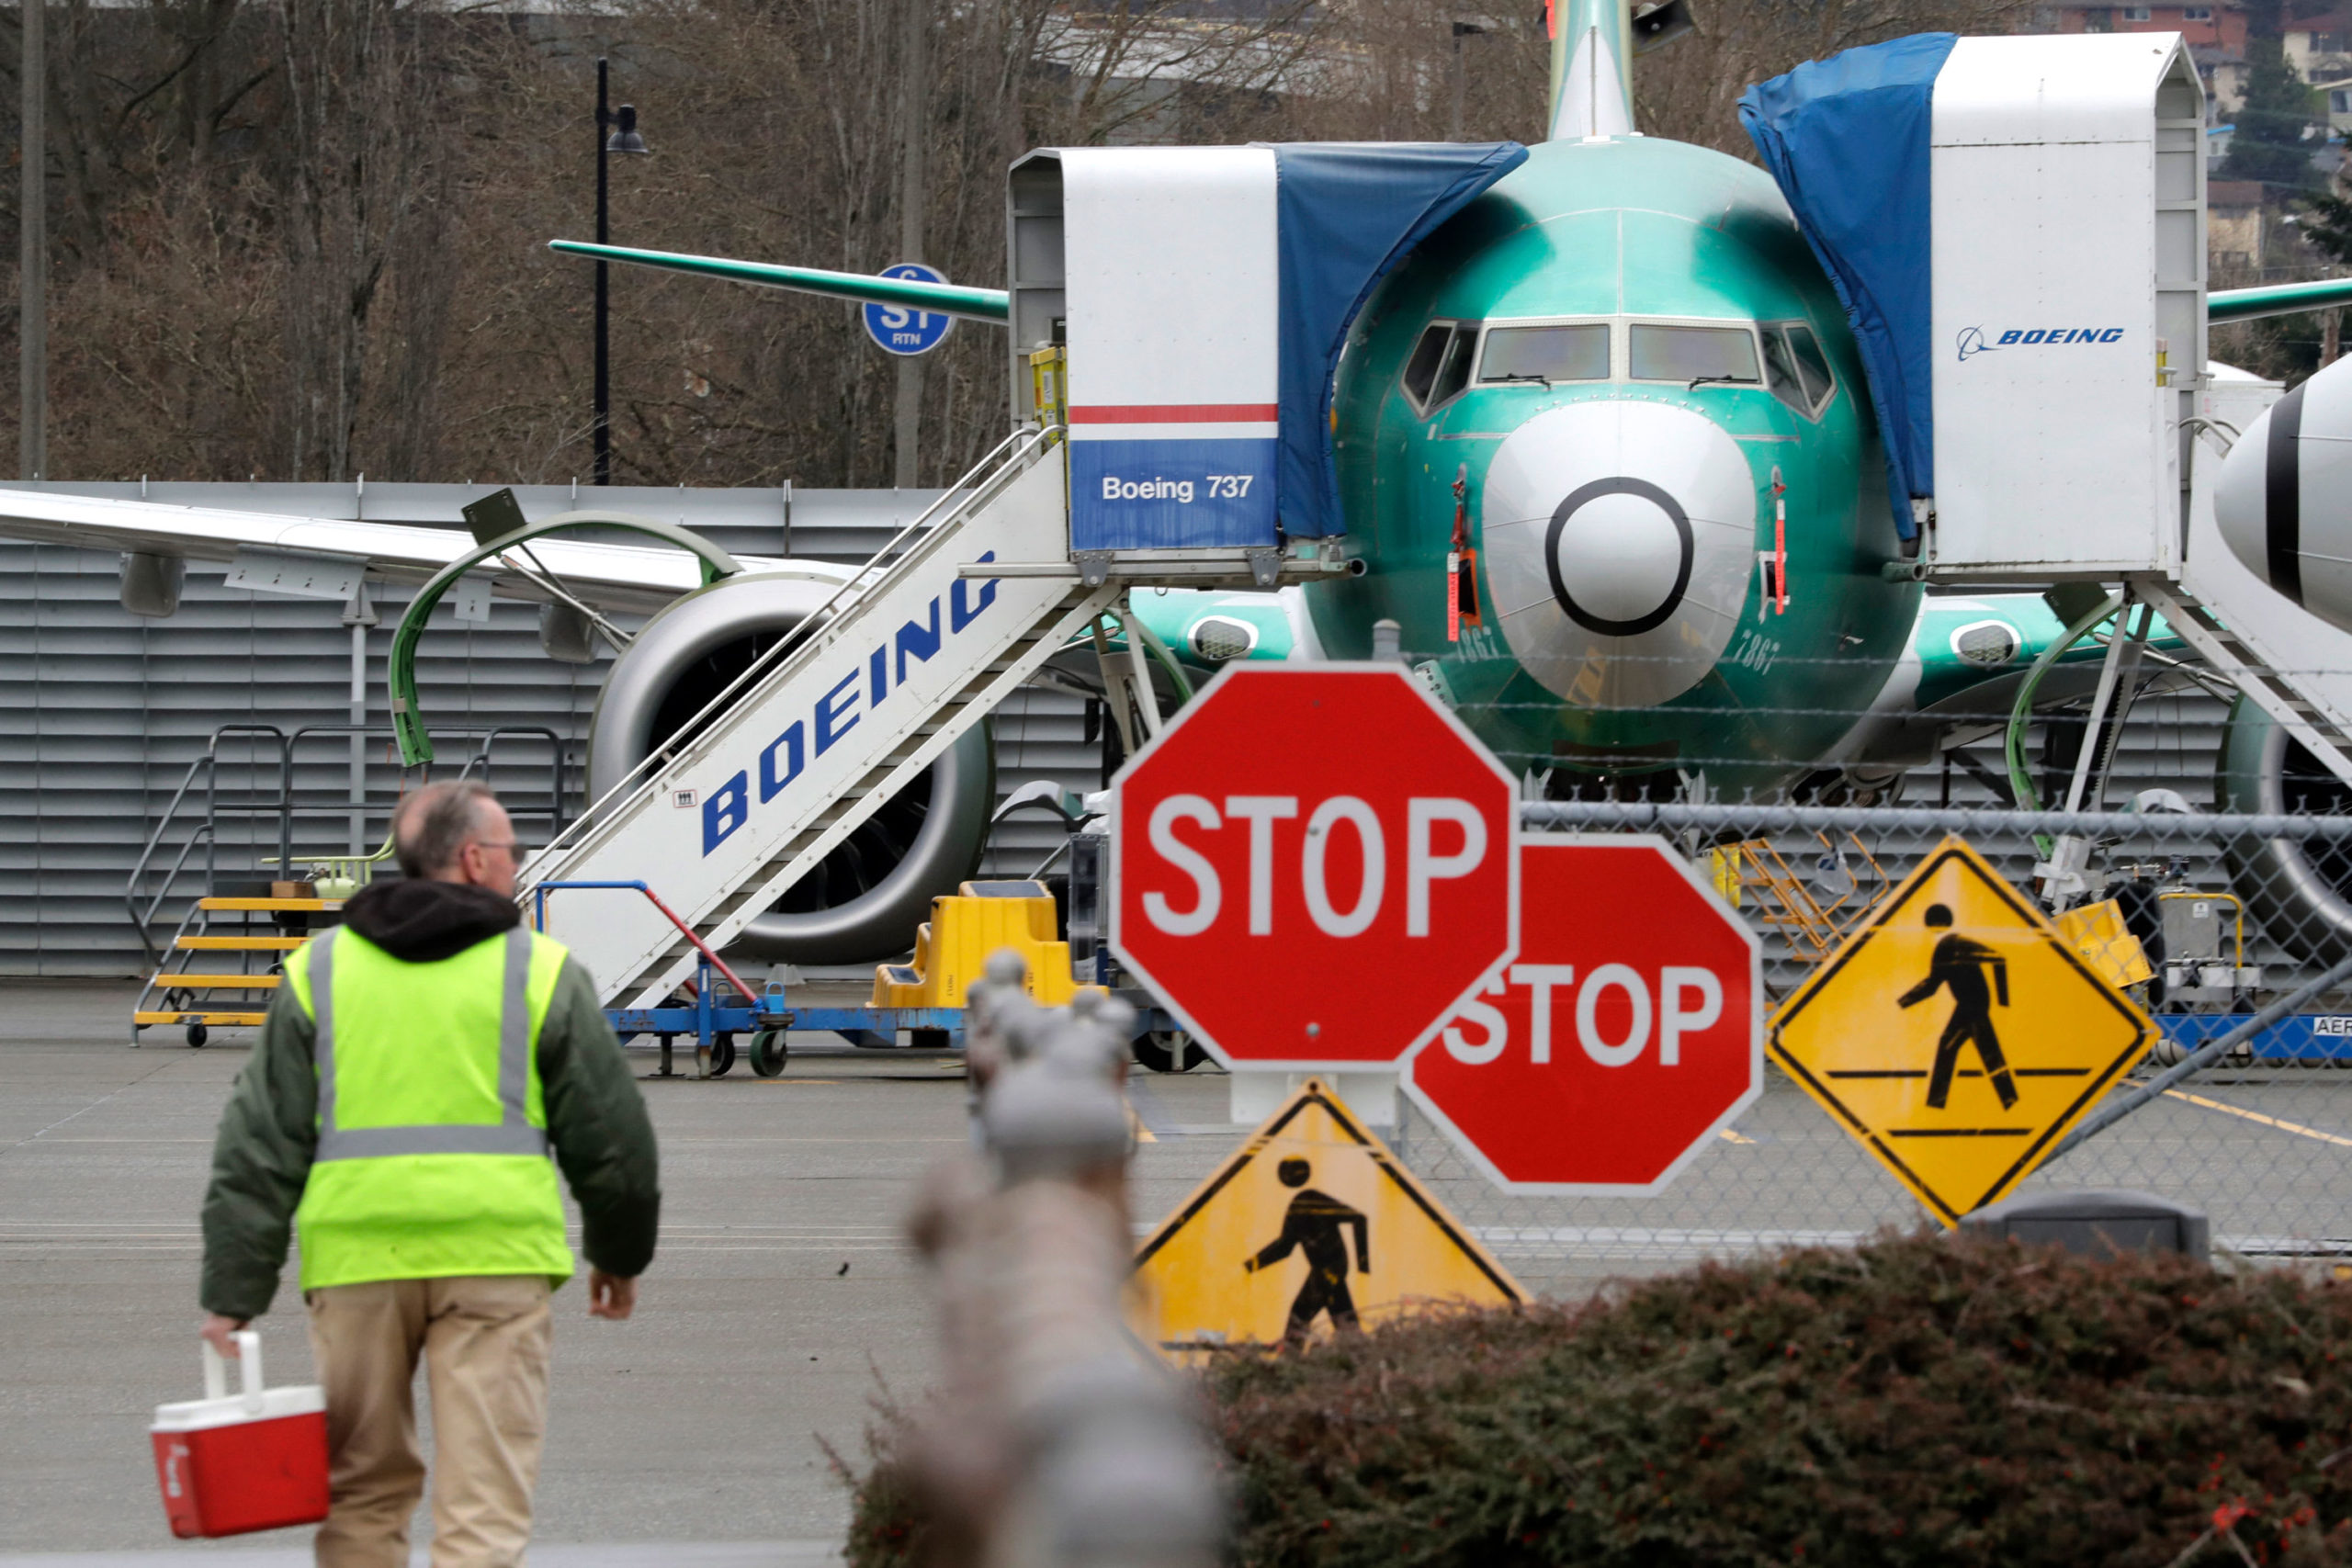 Boeing to develop 737 Max inspections, sources say